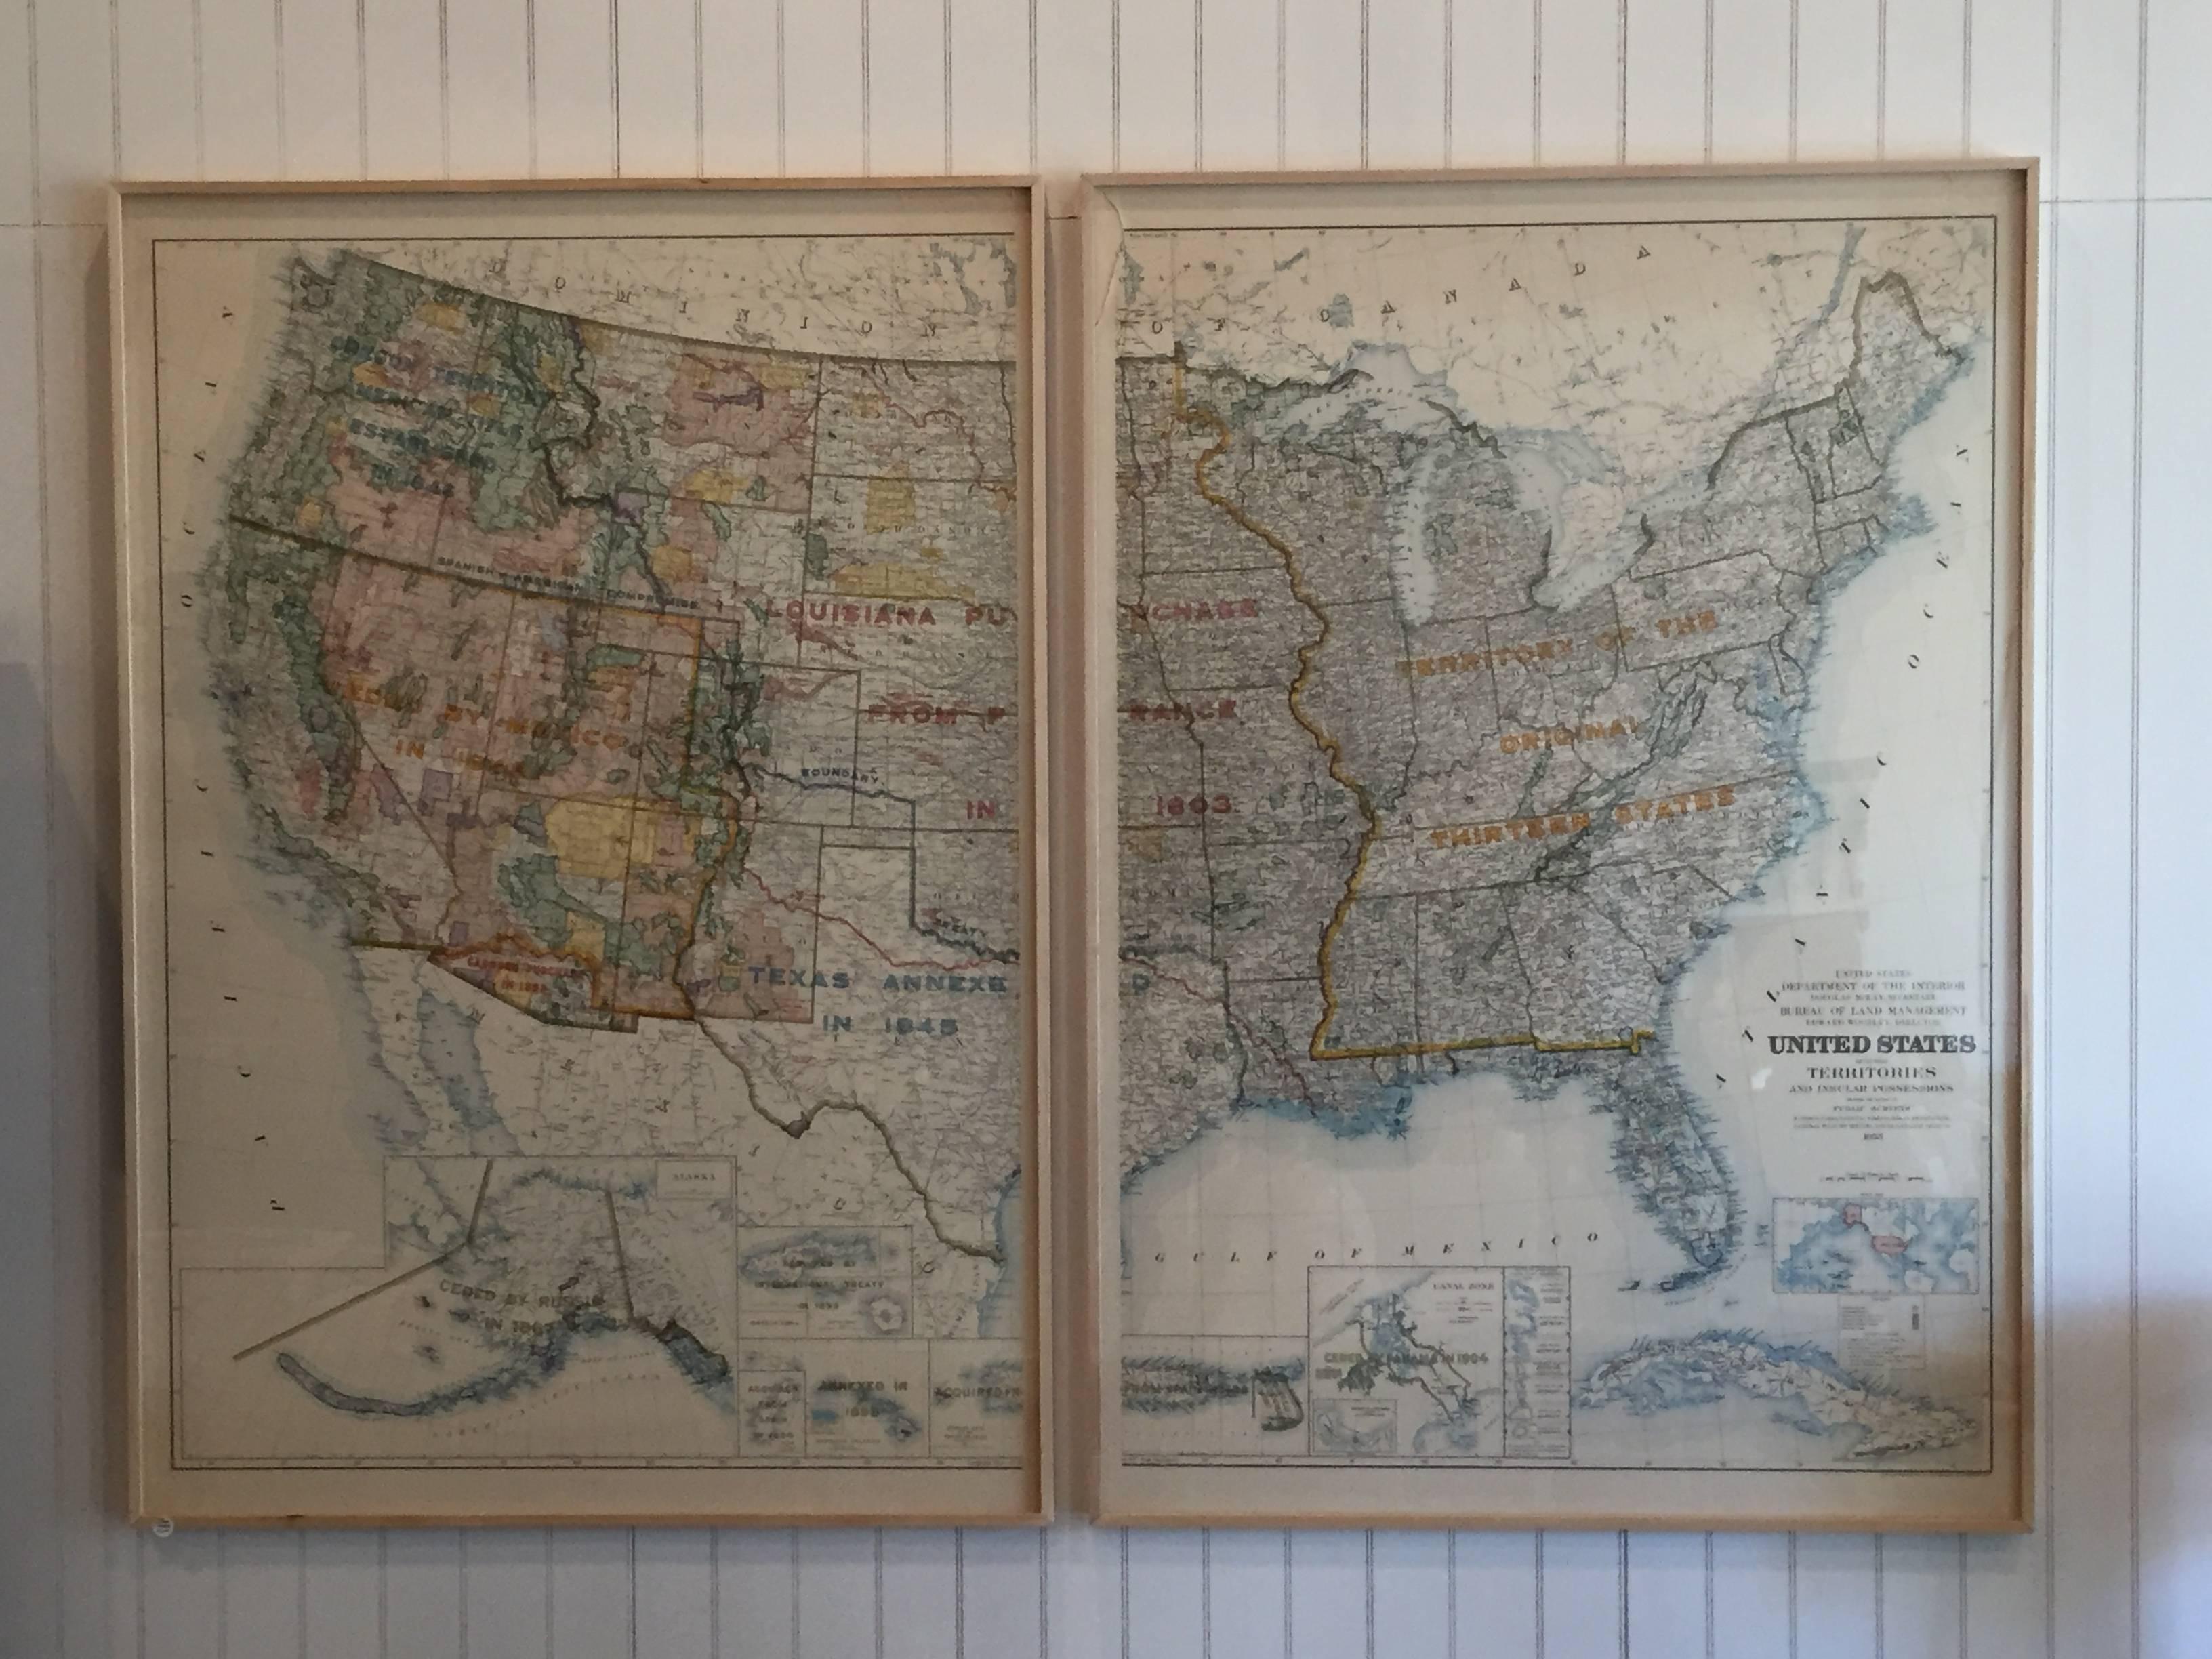 Map of United States Territories and Insular Possessions, circa 1953 reproduction.
Department of interior - Douglas McKay - Secretary.
Bureau of Land Management - Edward Woozley - Director.

Measures: 44.5